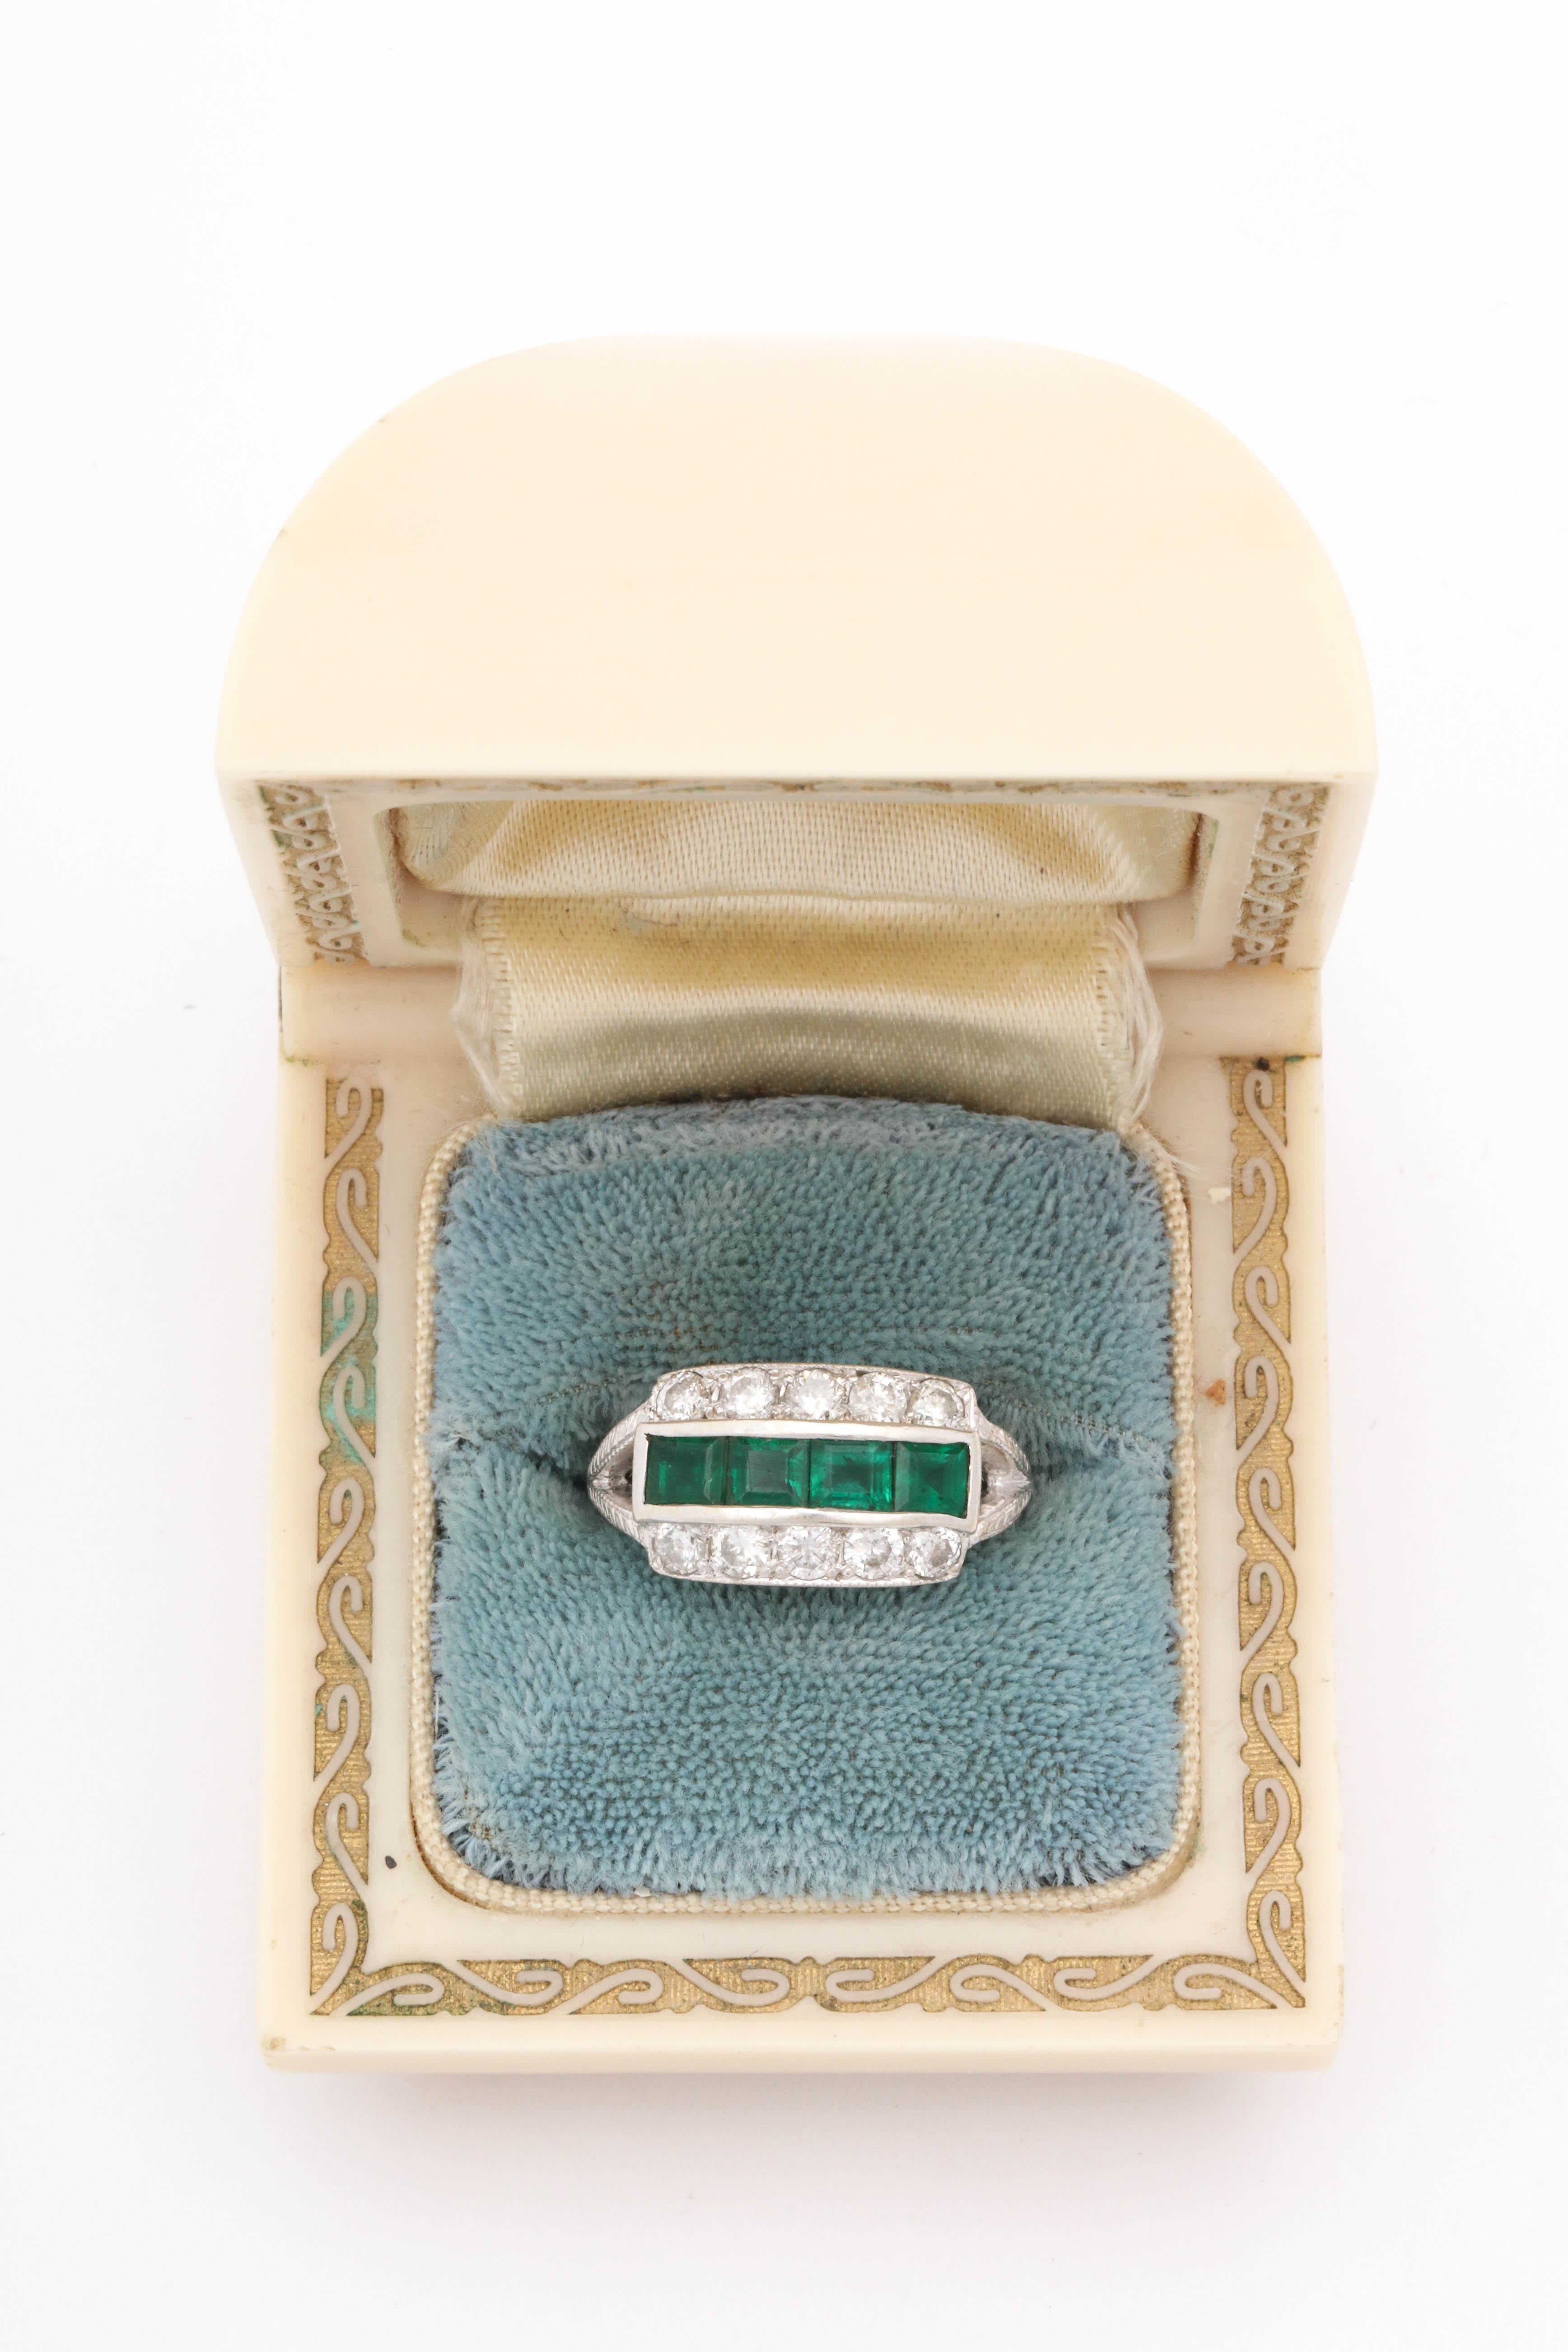 One Ladies Band Style Ring Created In 18kt White Gold Set With [4] Emerald Cut Emeralds Weighing Approximately .75ct Total Weight. Further Bordered By [10] Antique Cut Diamonds Weighing Approximately 1 Carat Total Weight. Ring Size 6 And May Easily